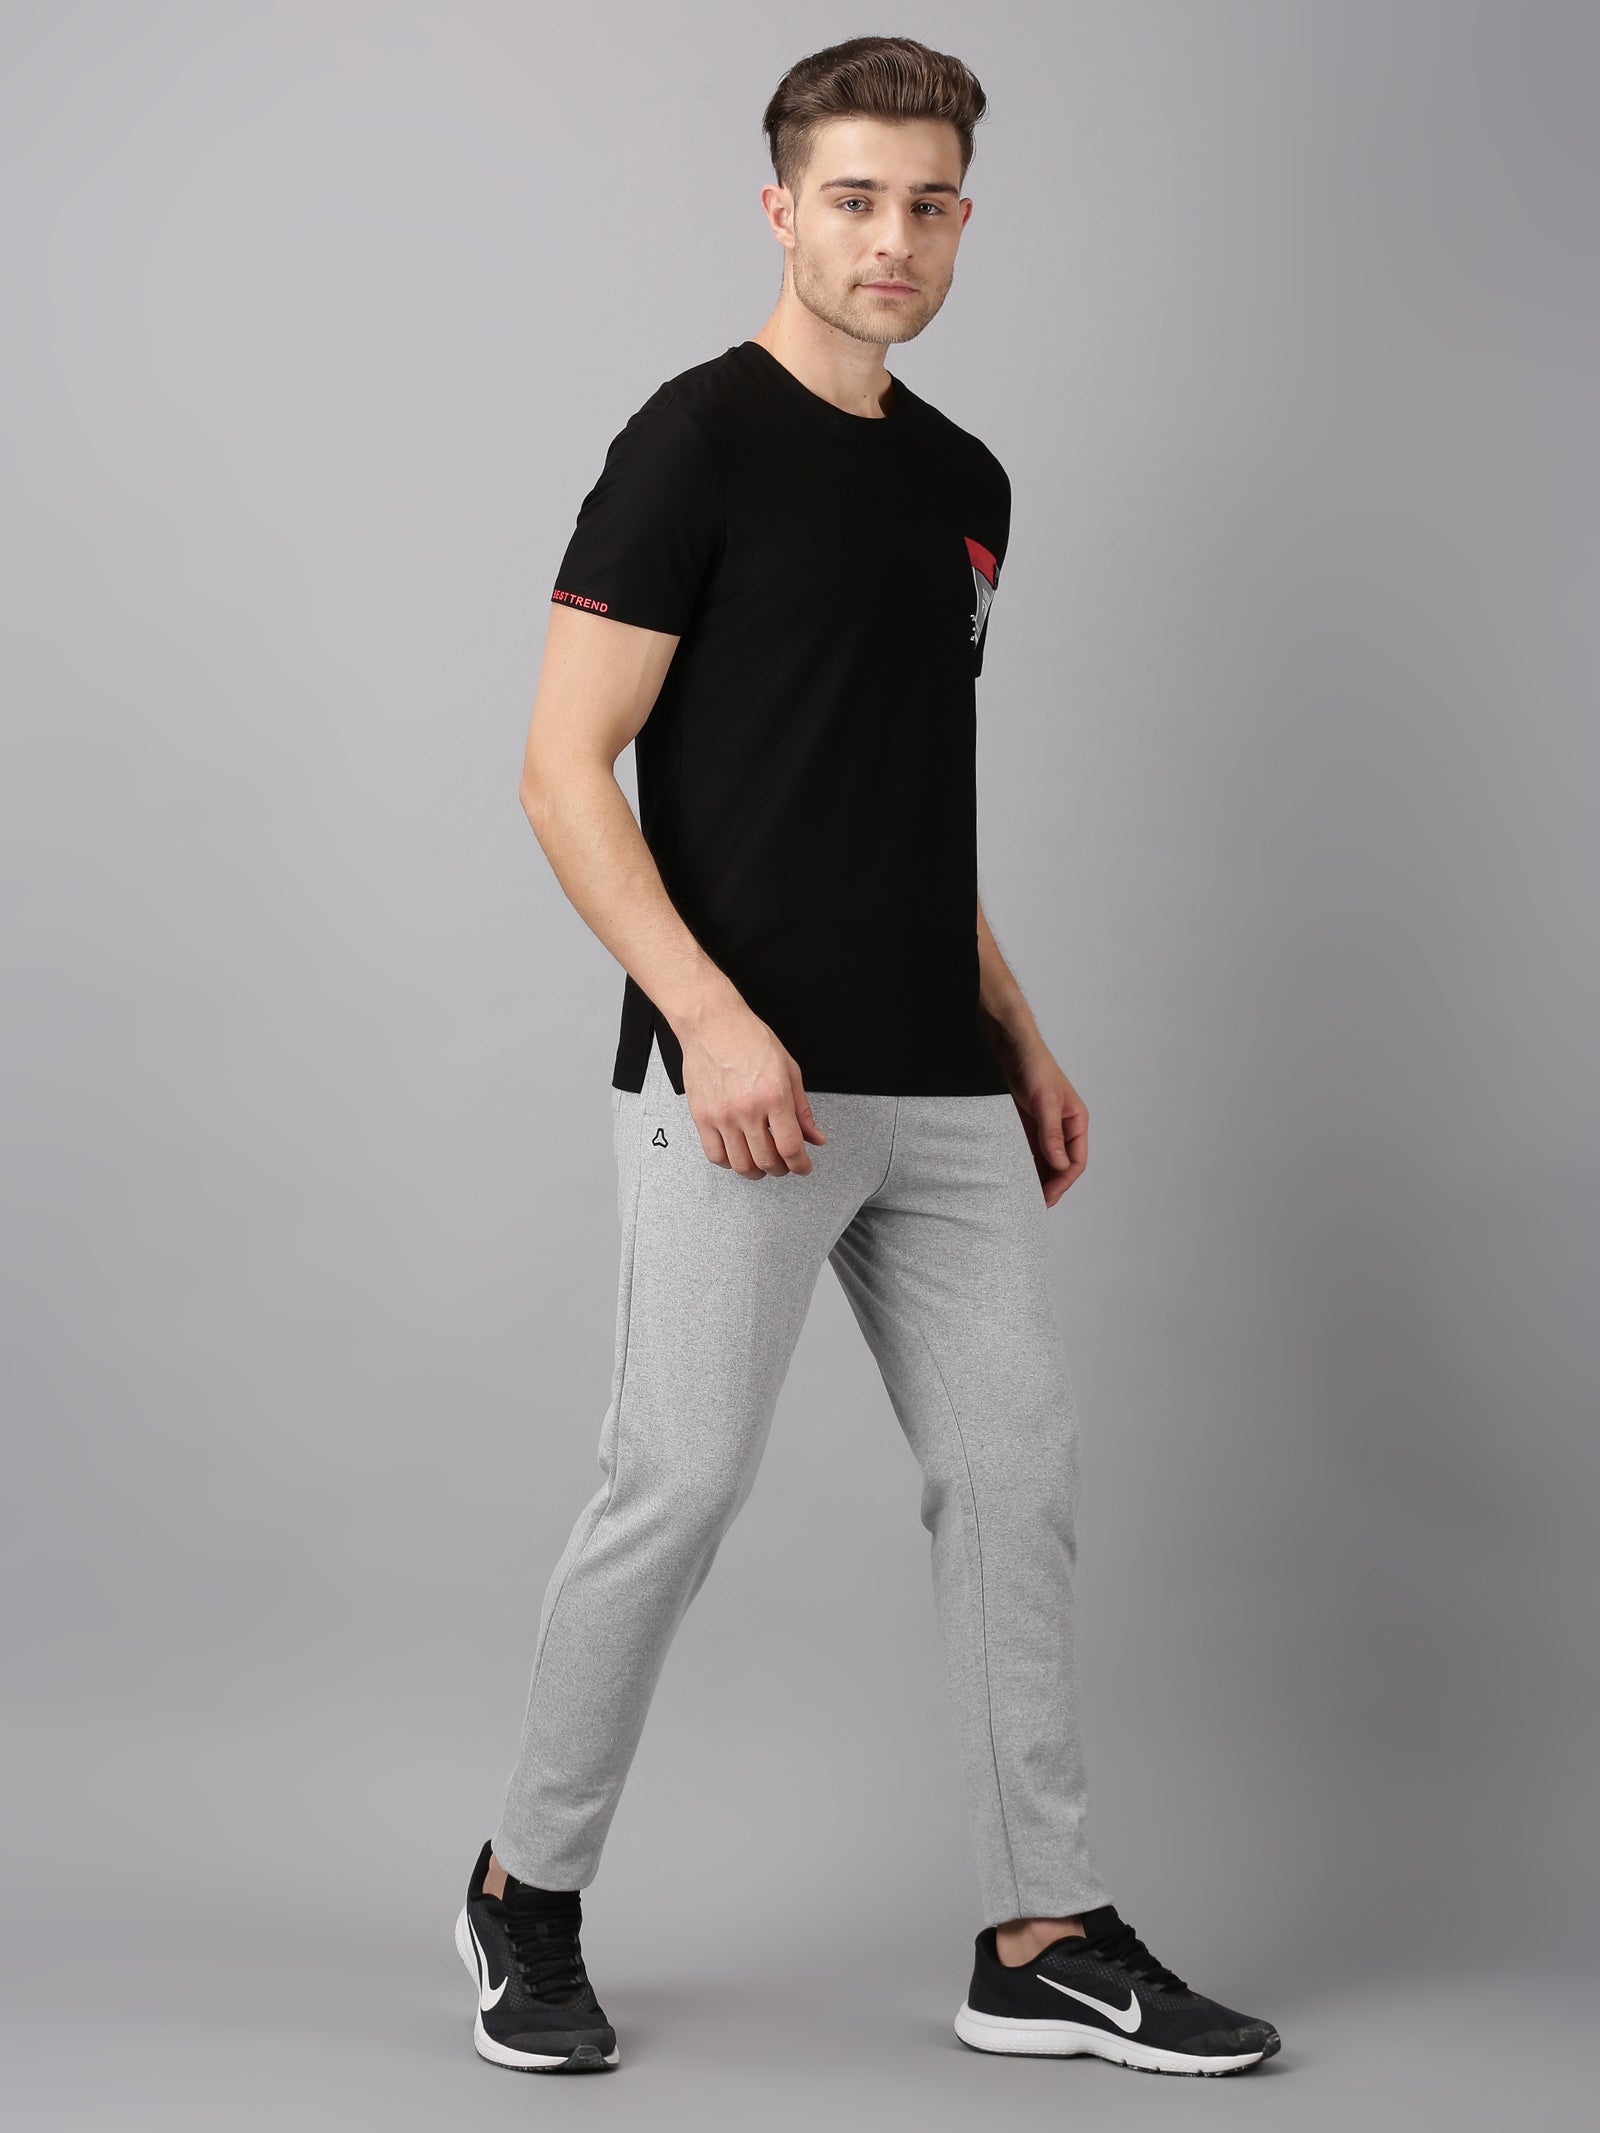 Men's Grey Trousers | Cargo & Chino Trousers | Next